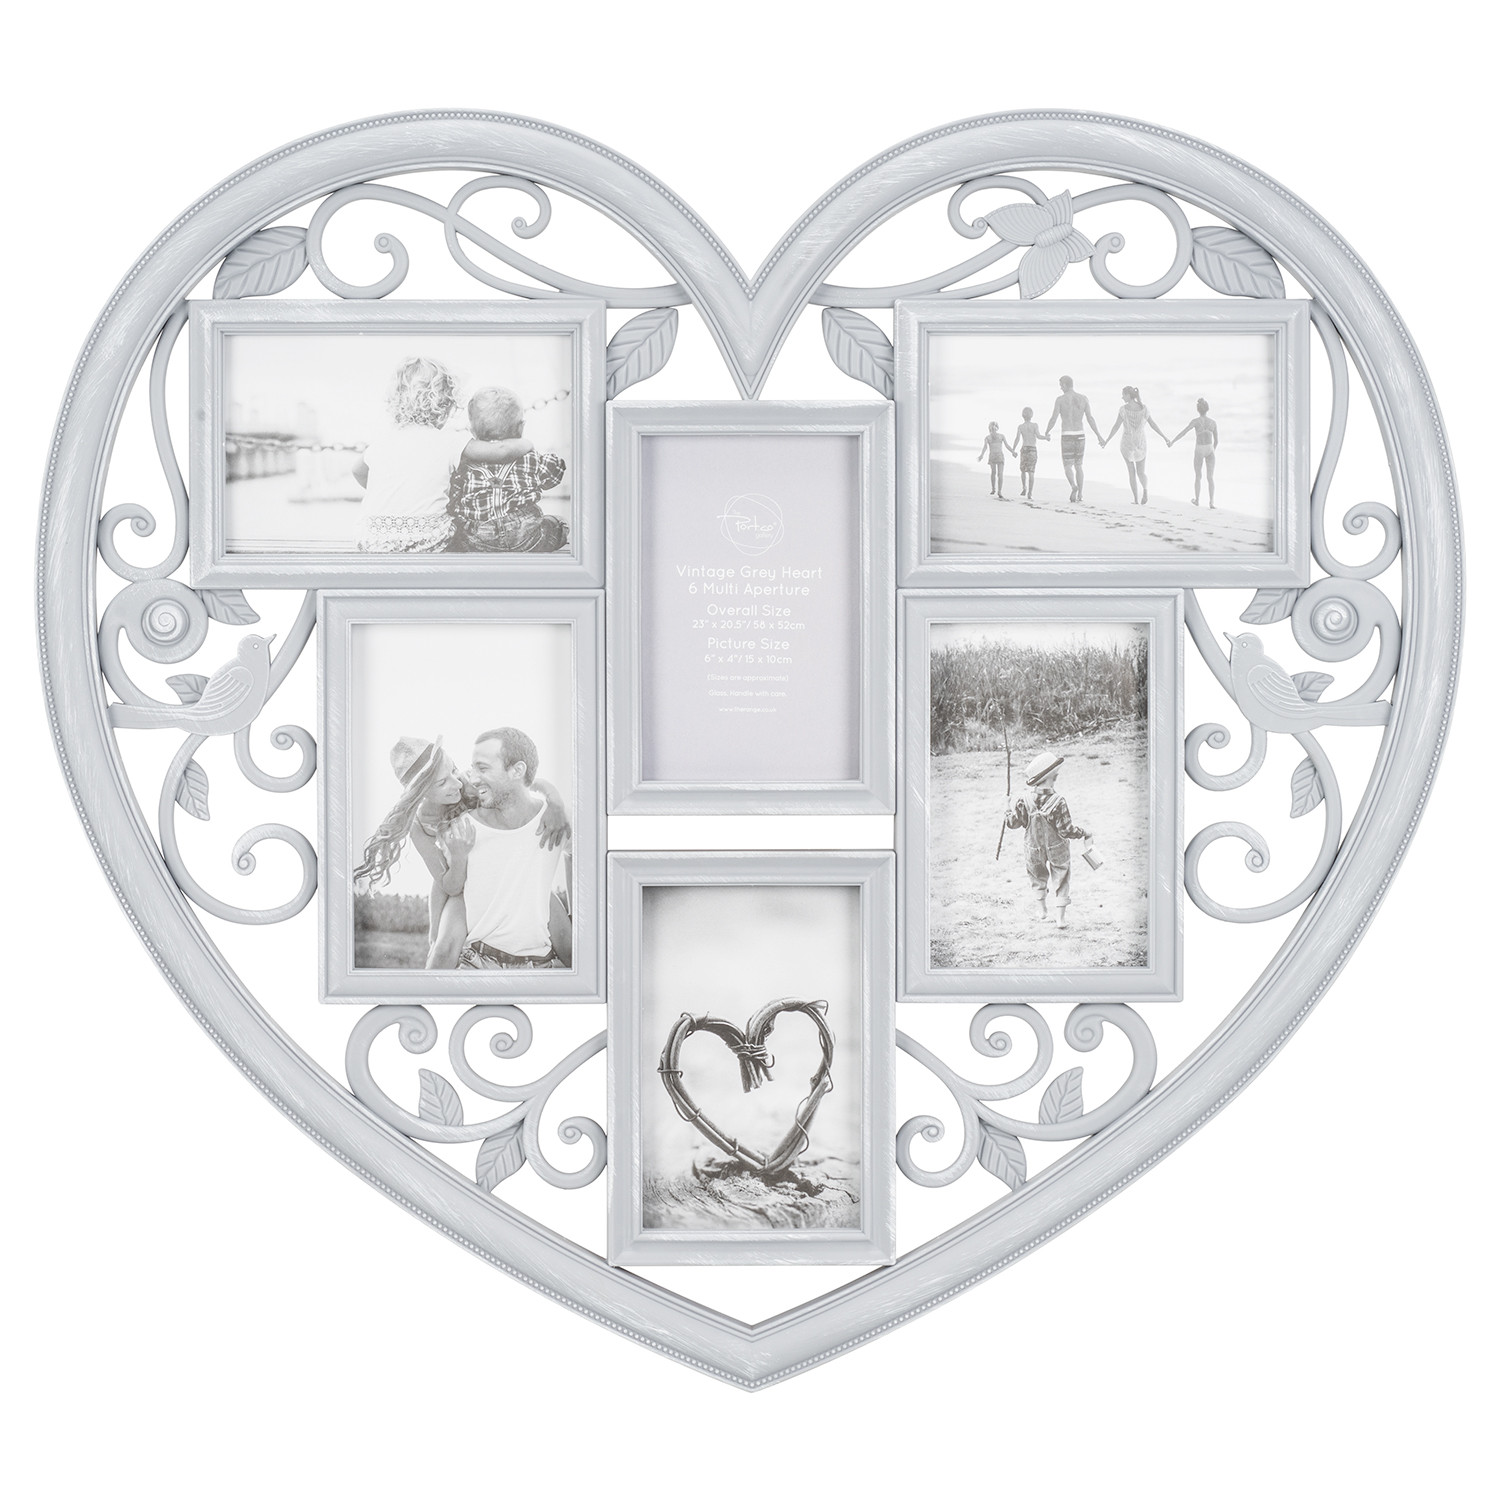 The Port. Co Gallery Grey Vintage Heart 6 Multi Aperture Photo Frame Image